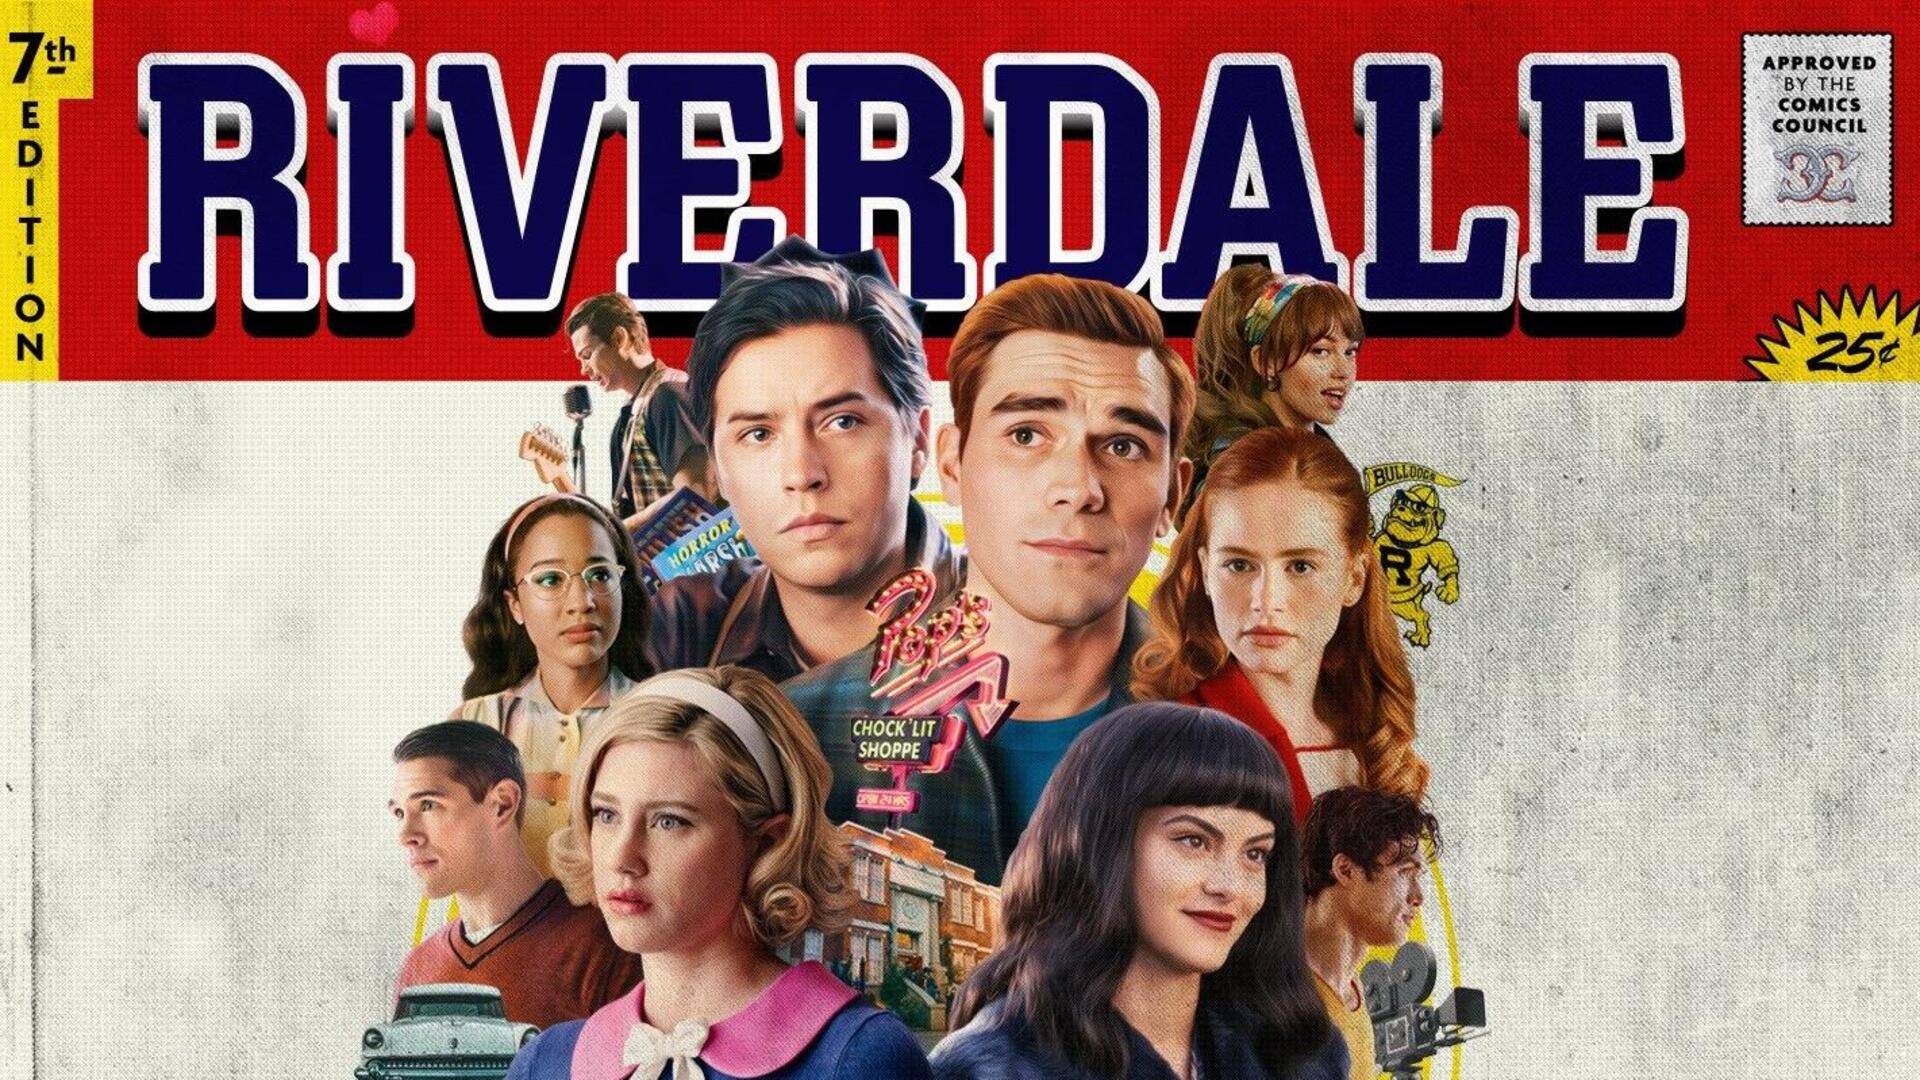 OTT: 'Riverdale' to conclude today